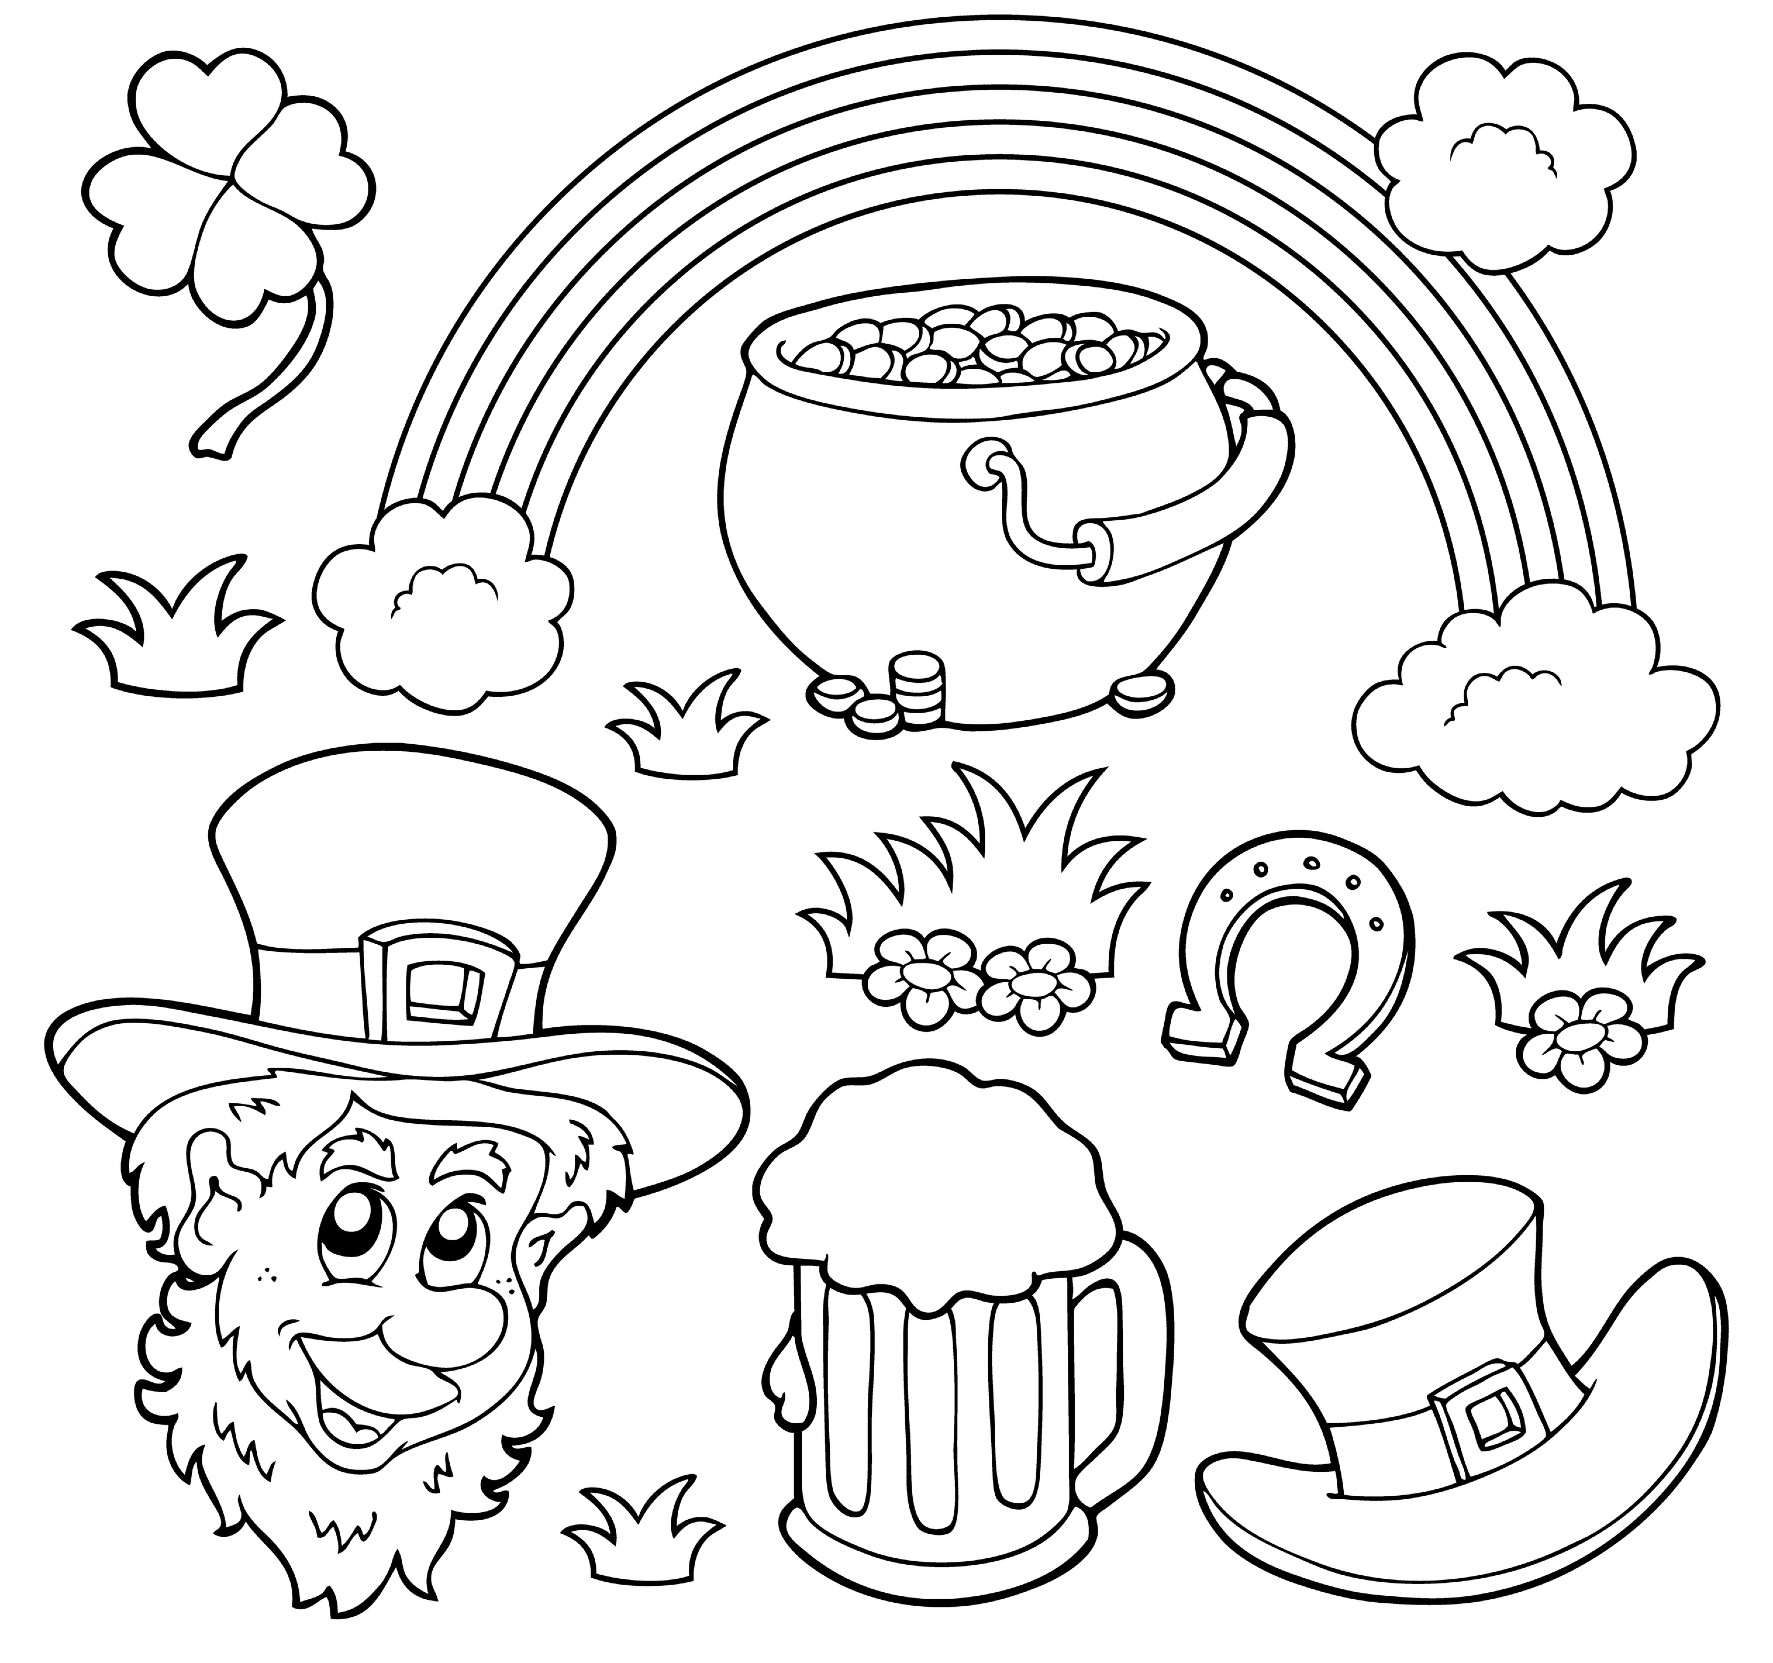 Saint patricks day coloring pages